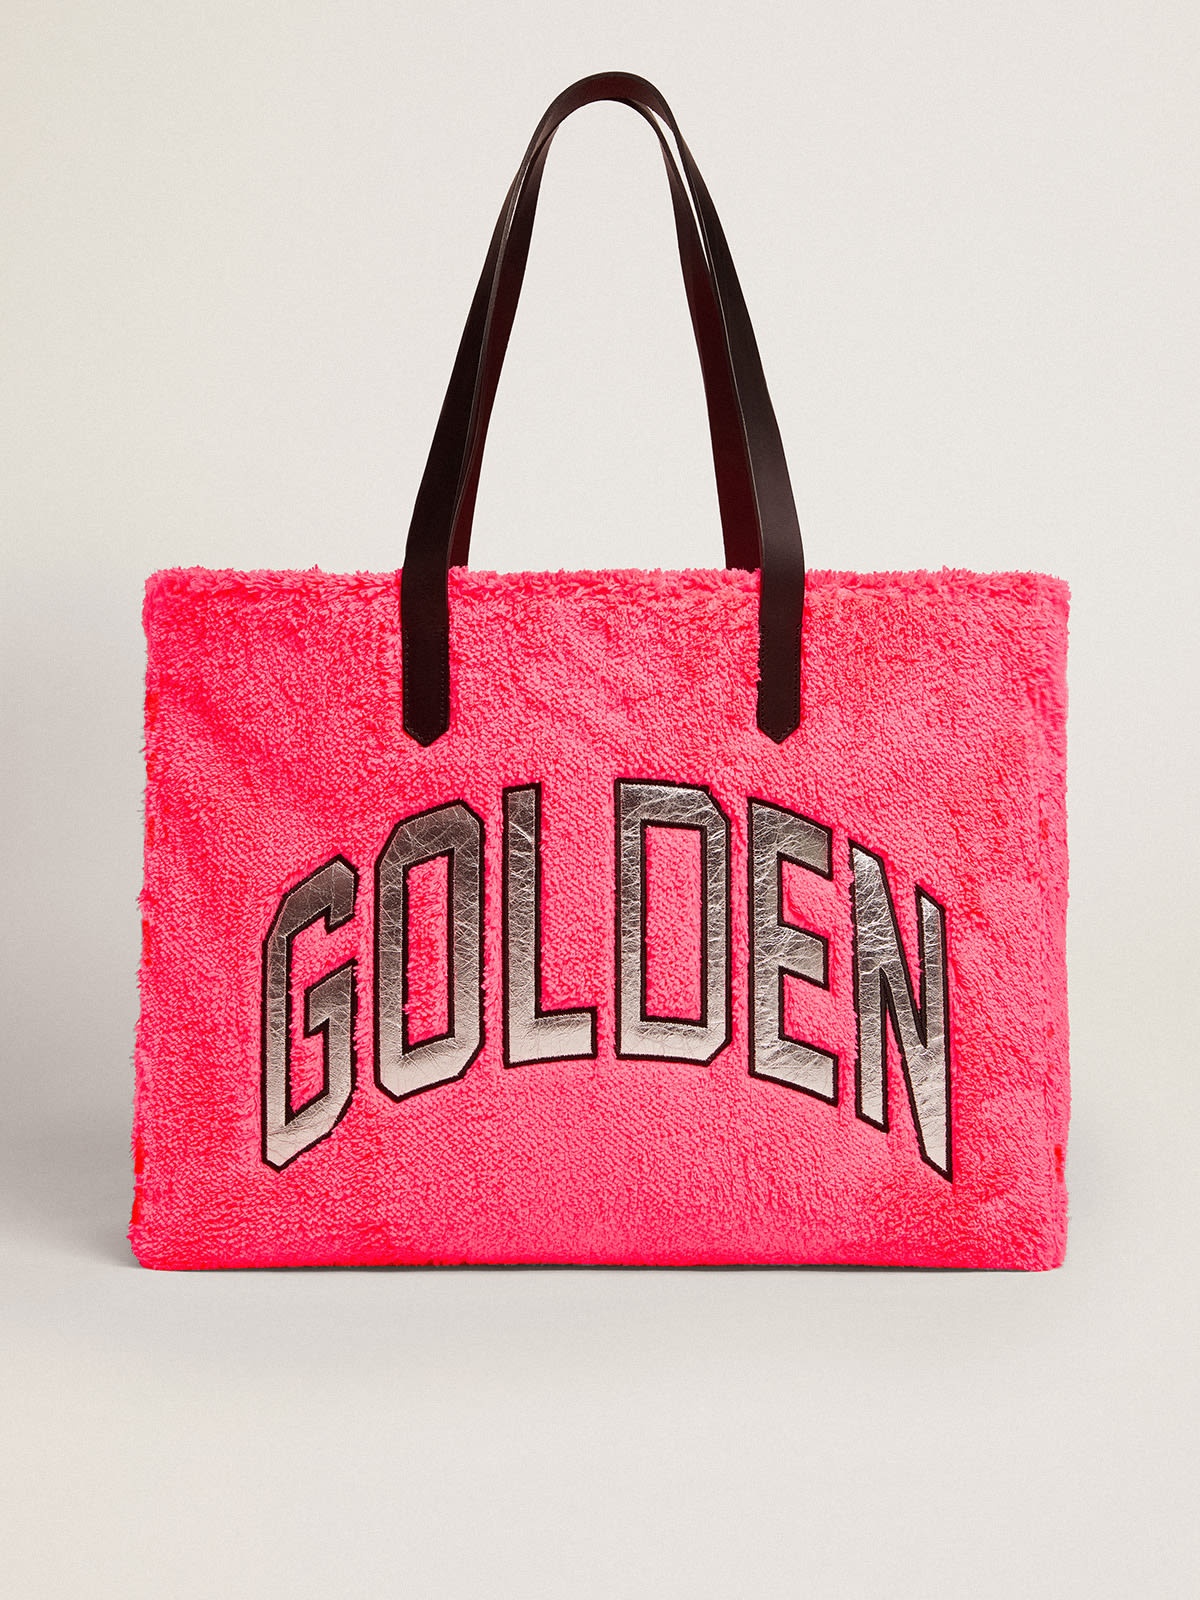 East-West California Bag in fuchsia terry fabric with Golden lettering in silver metallic leather - 1